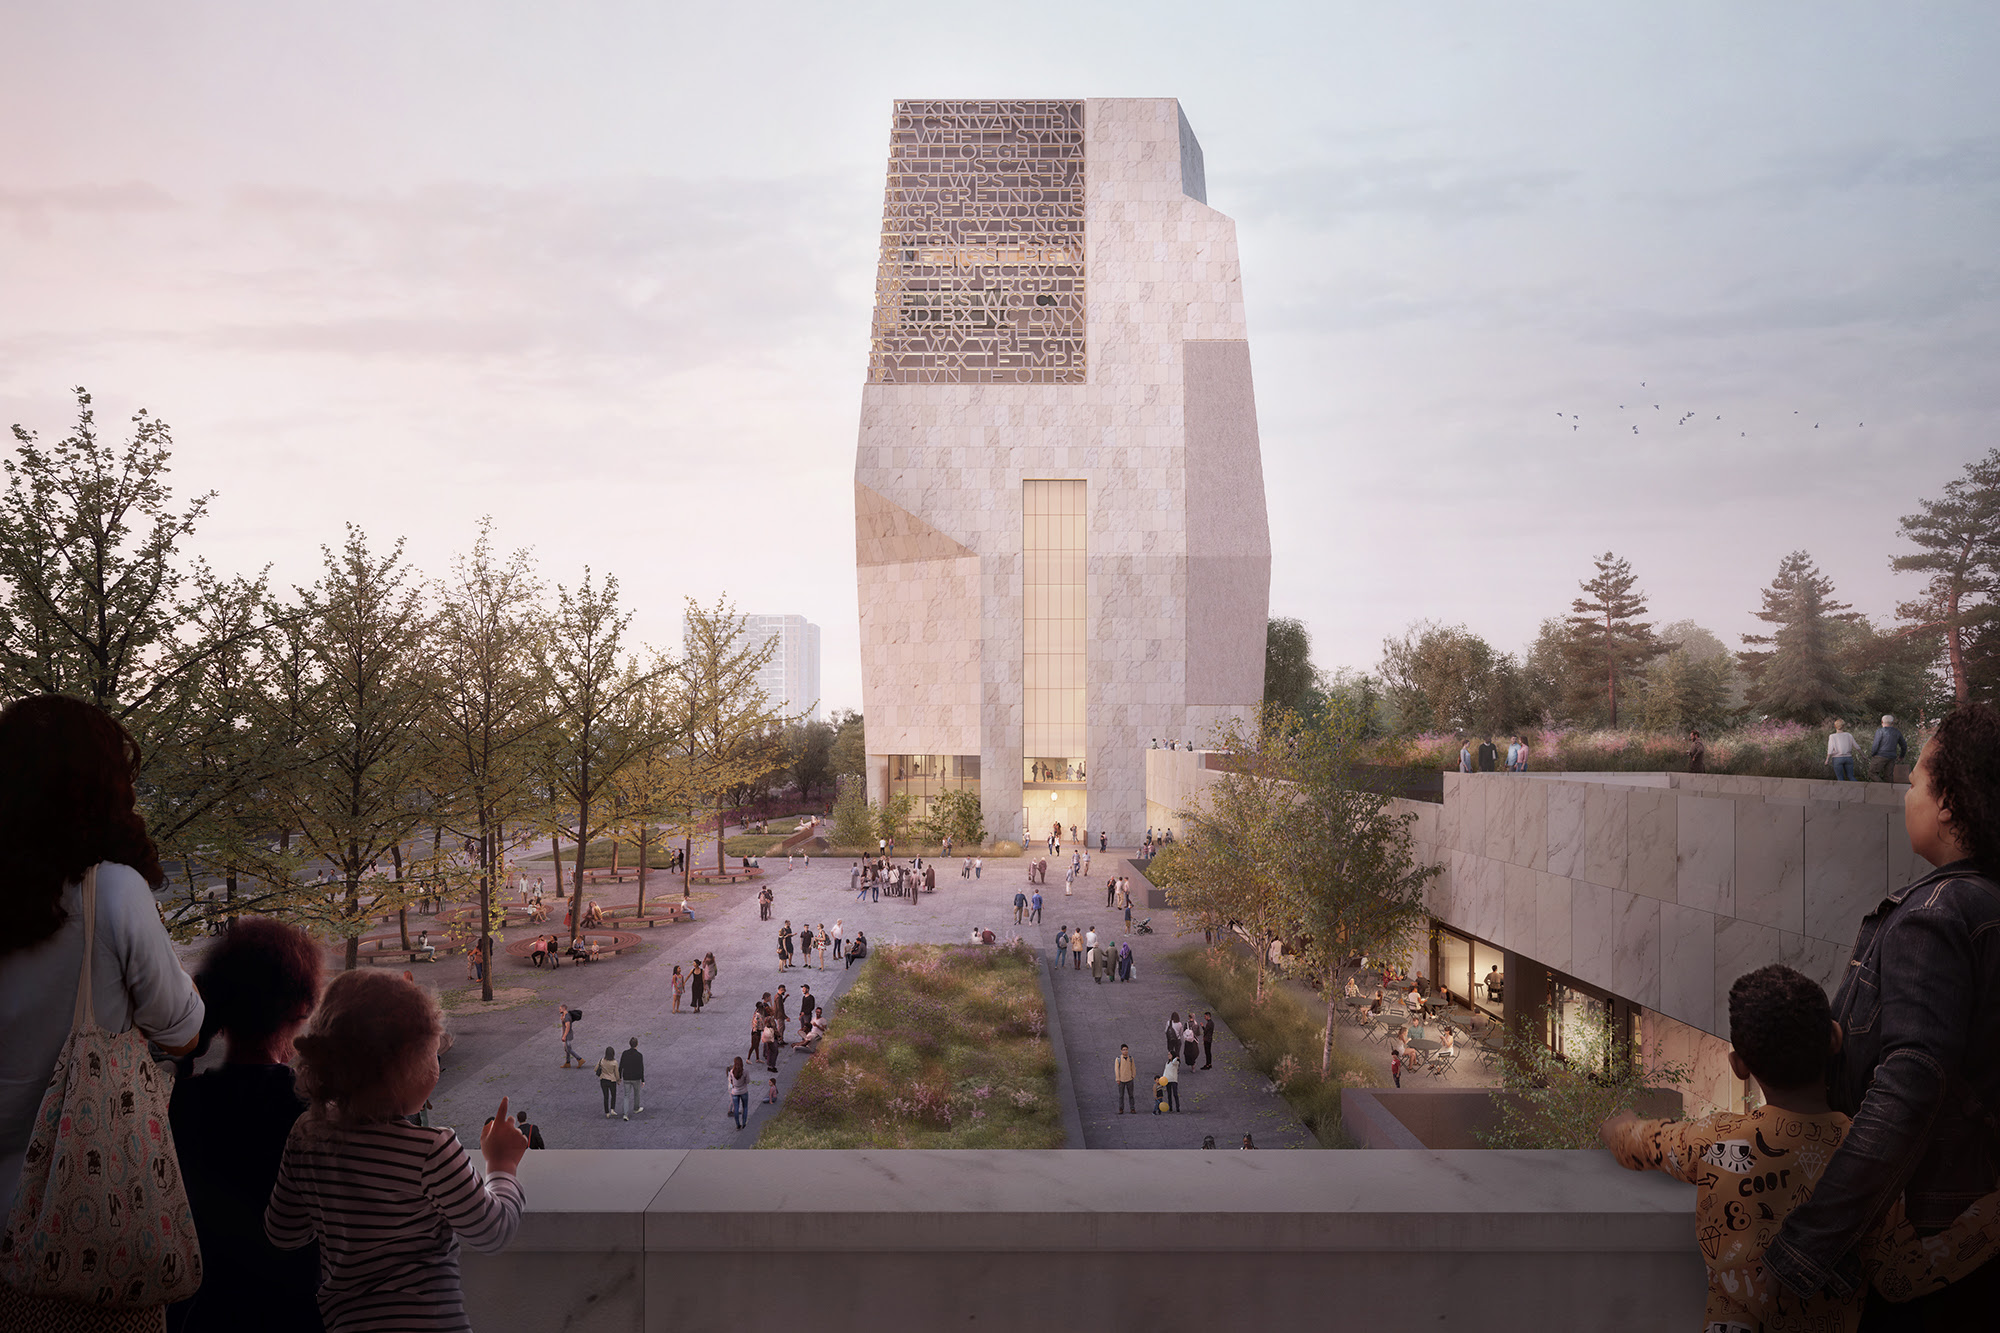 A rendering of the Obama Presidential Center featuring a large, light-stoned building front and center, with walkways filled with people in front of it.